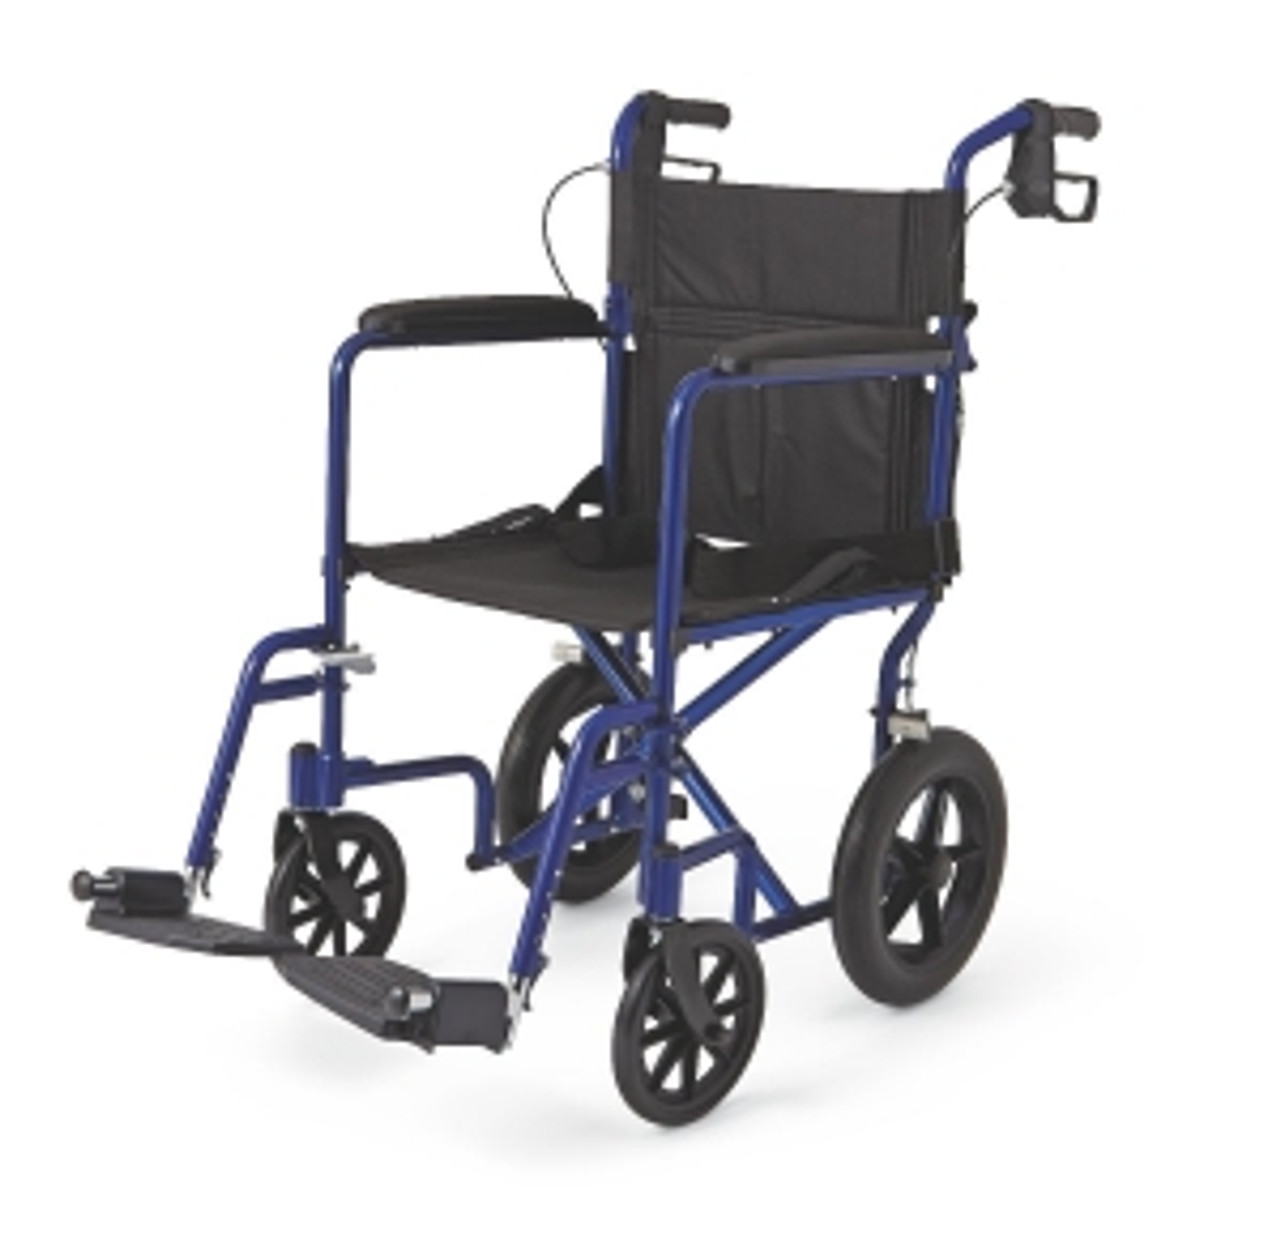 Lifetime warranty on frame
Lightweight powder-coated aluminum frame and 12" (30.5 cm) wheels with handbrakes on top, plus a seat belt, make transport safe and smooth
Fold-down back reveals storage space
Larger rear wheels for better performance on uneven outdoor surfaces
Weighs only 32 lb. (15 kg)